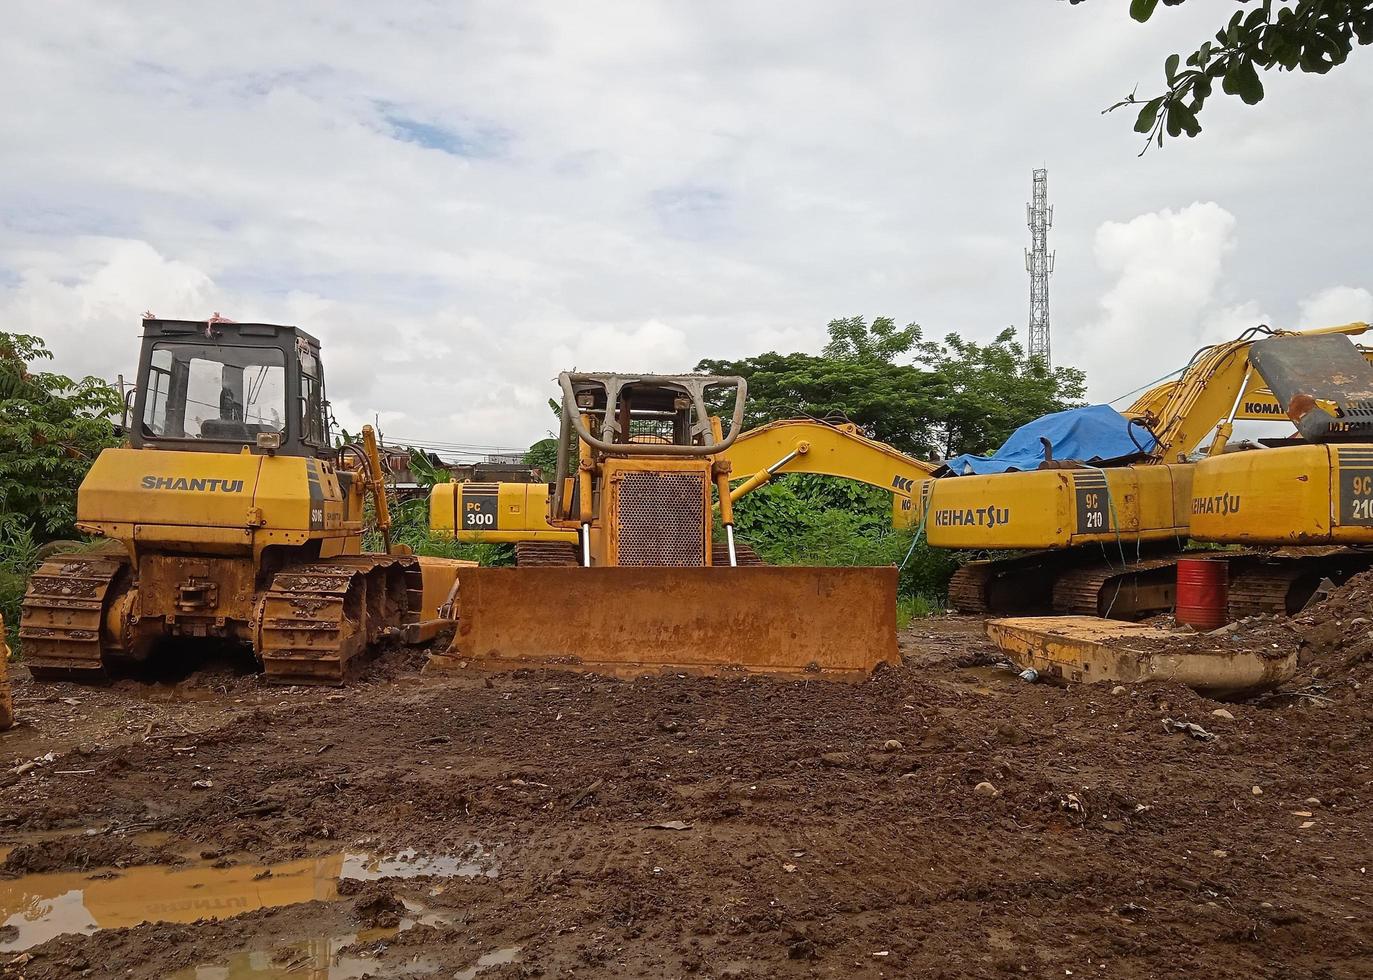 Morowali, Indonesia, 10 may 2022- bulldozer and excavator operating at a mine site against a white cloud background photo